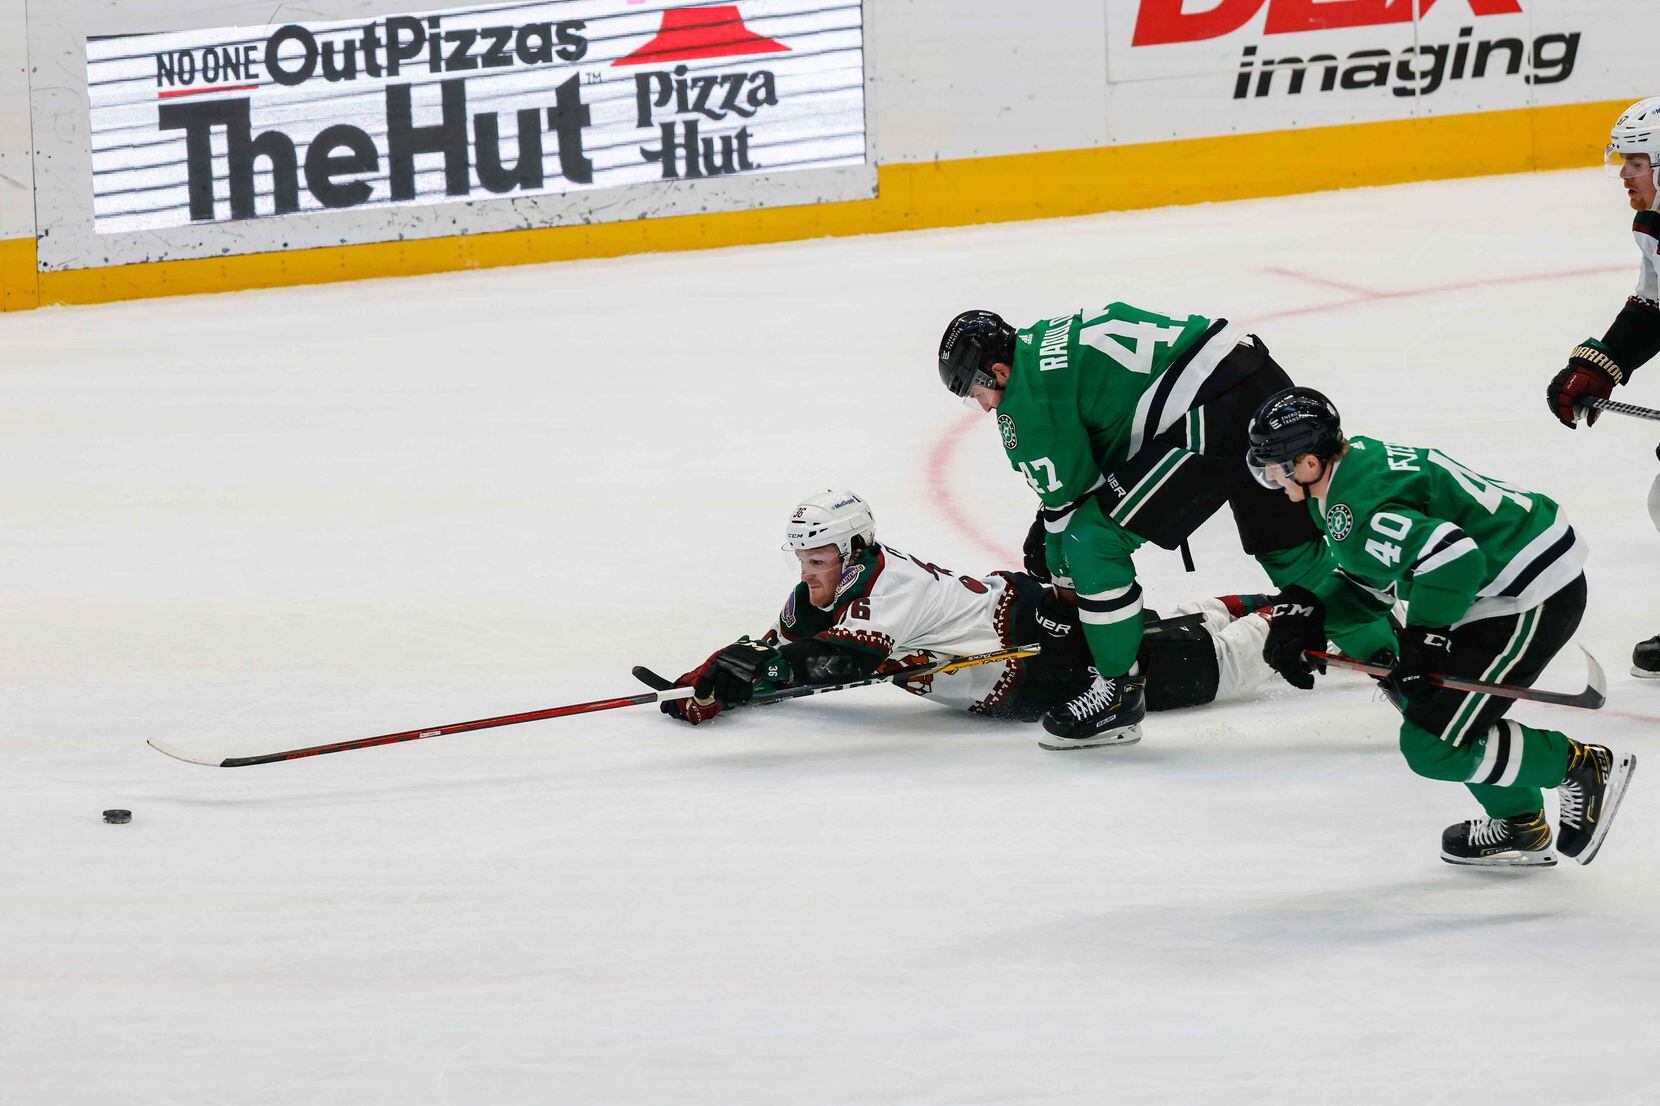 Arizona Coyotes right wing Christian Fischer (36) tries to recover the puck along with Dallas Stars right wing Alexander Radulov (47) and center Jacob Peterson (40) during second period at the American Airlines Center in Dallas on Monday, December 6, 2021. (Lola Gomez/The Dallas Morning News)